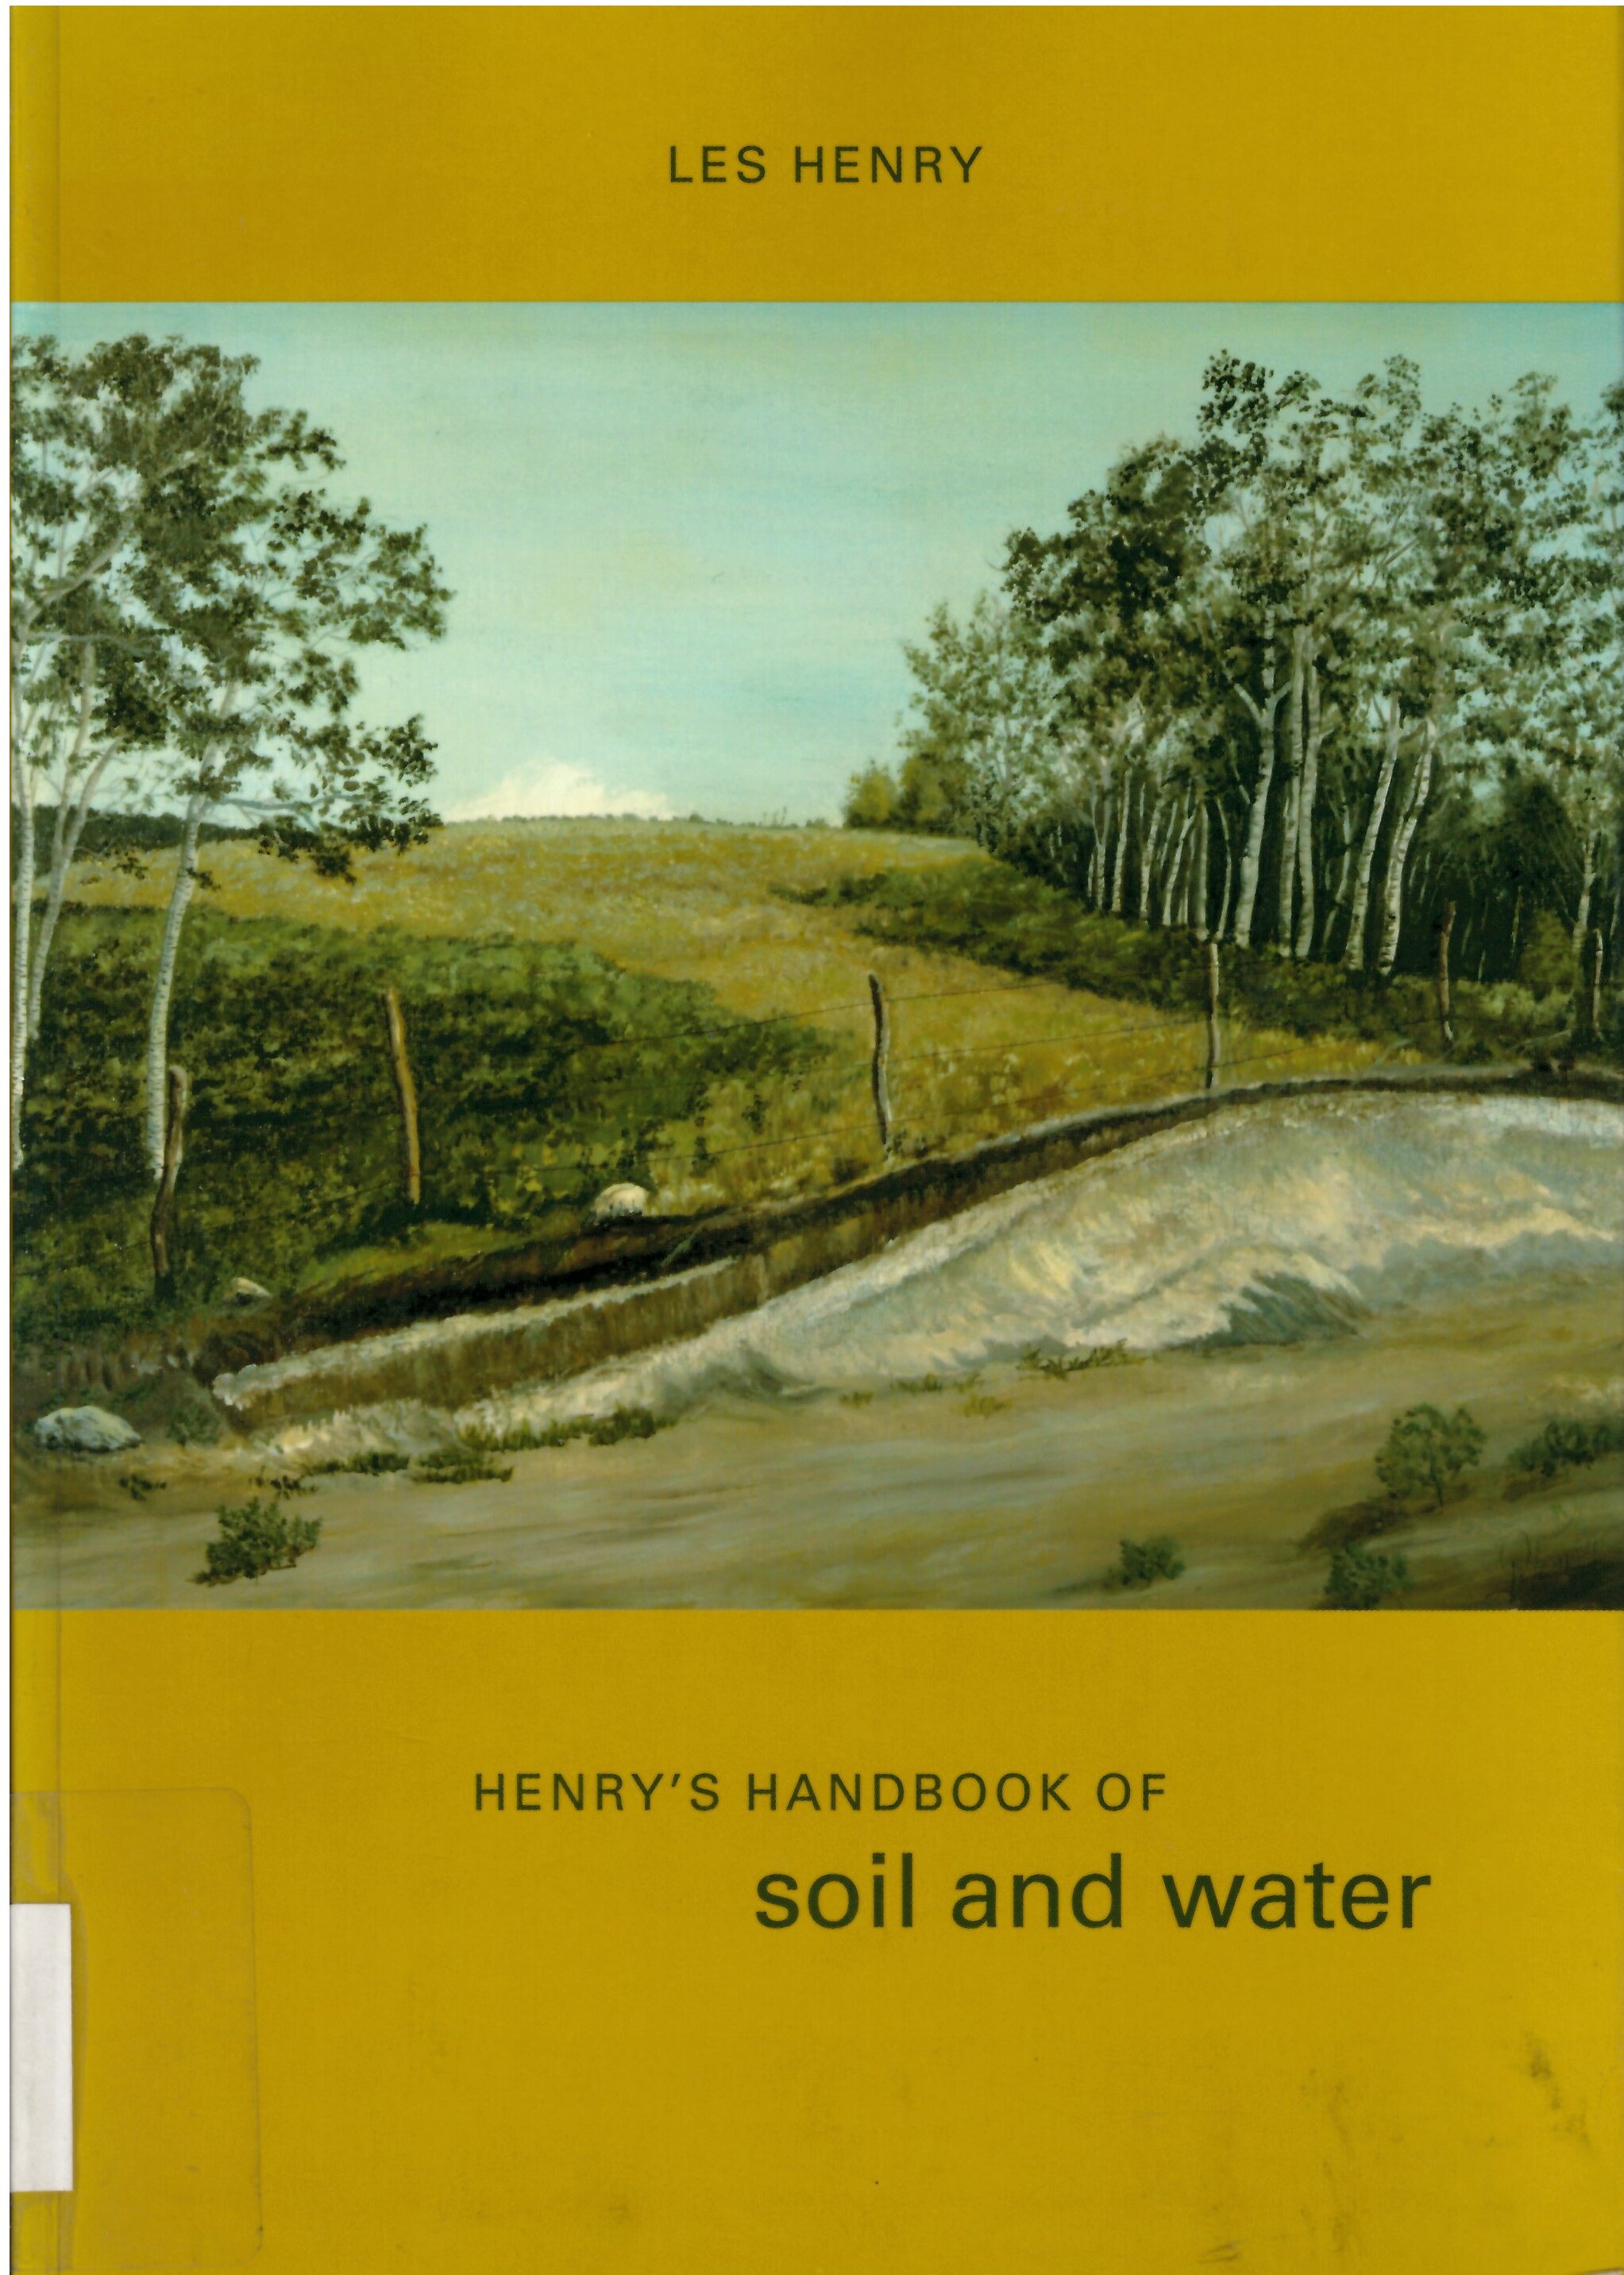 Henry's handbook of soil and water